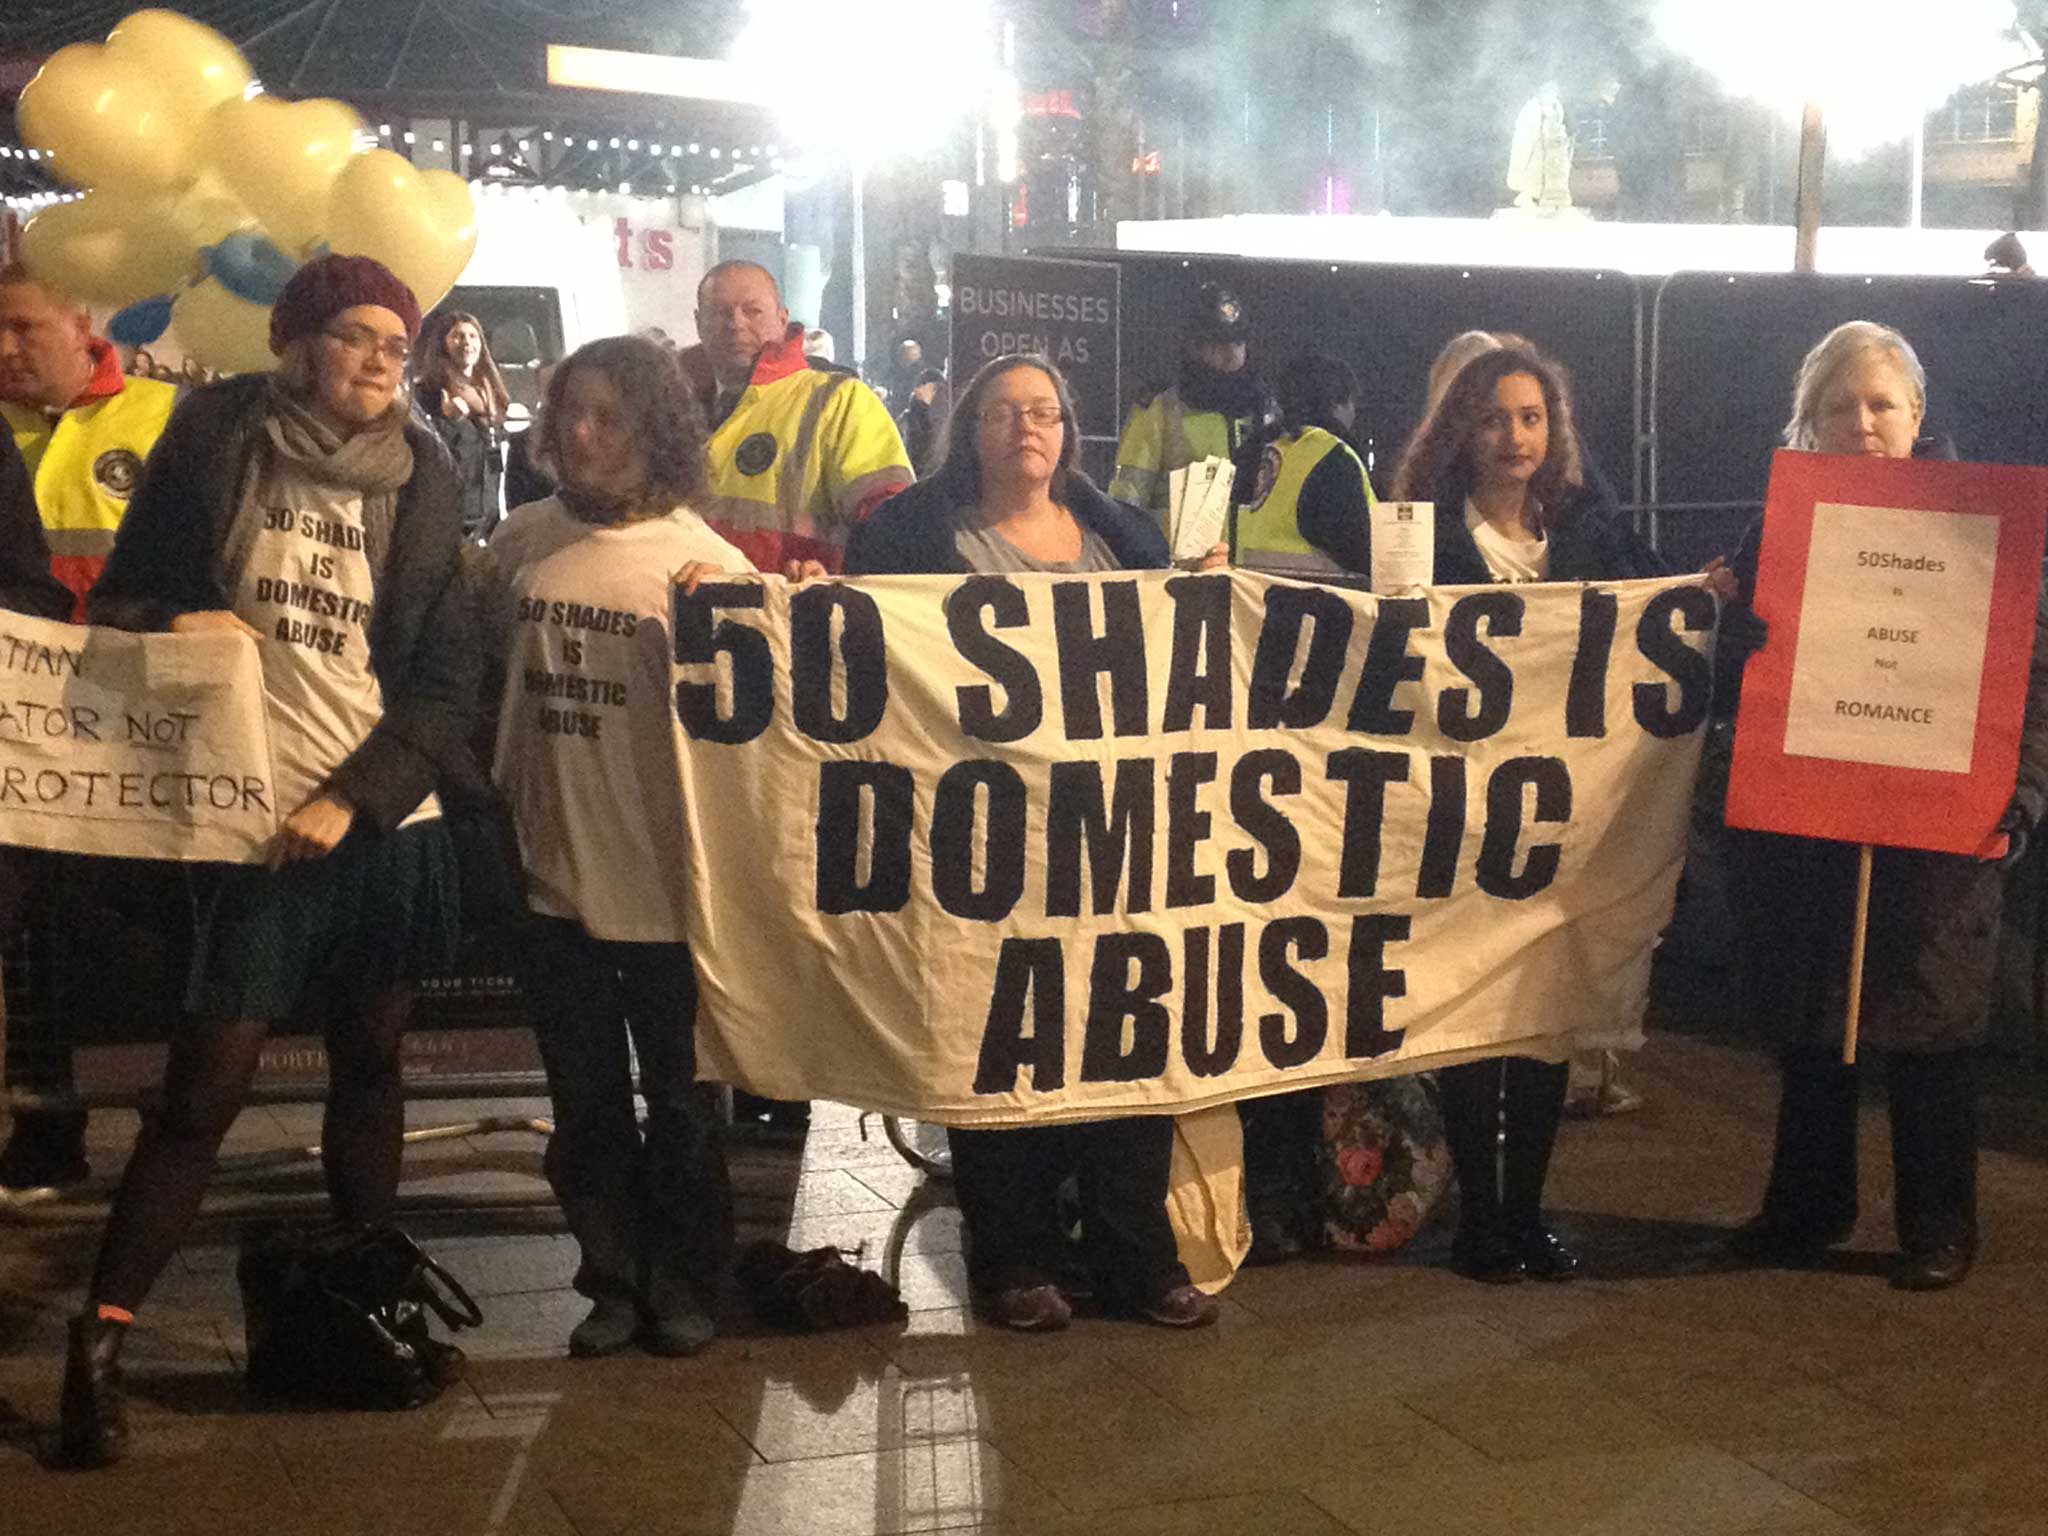 Protesters outside the premiere in Leicester Square